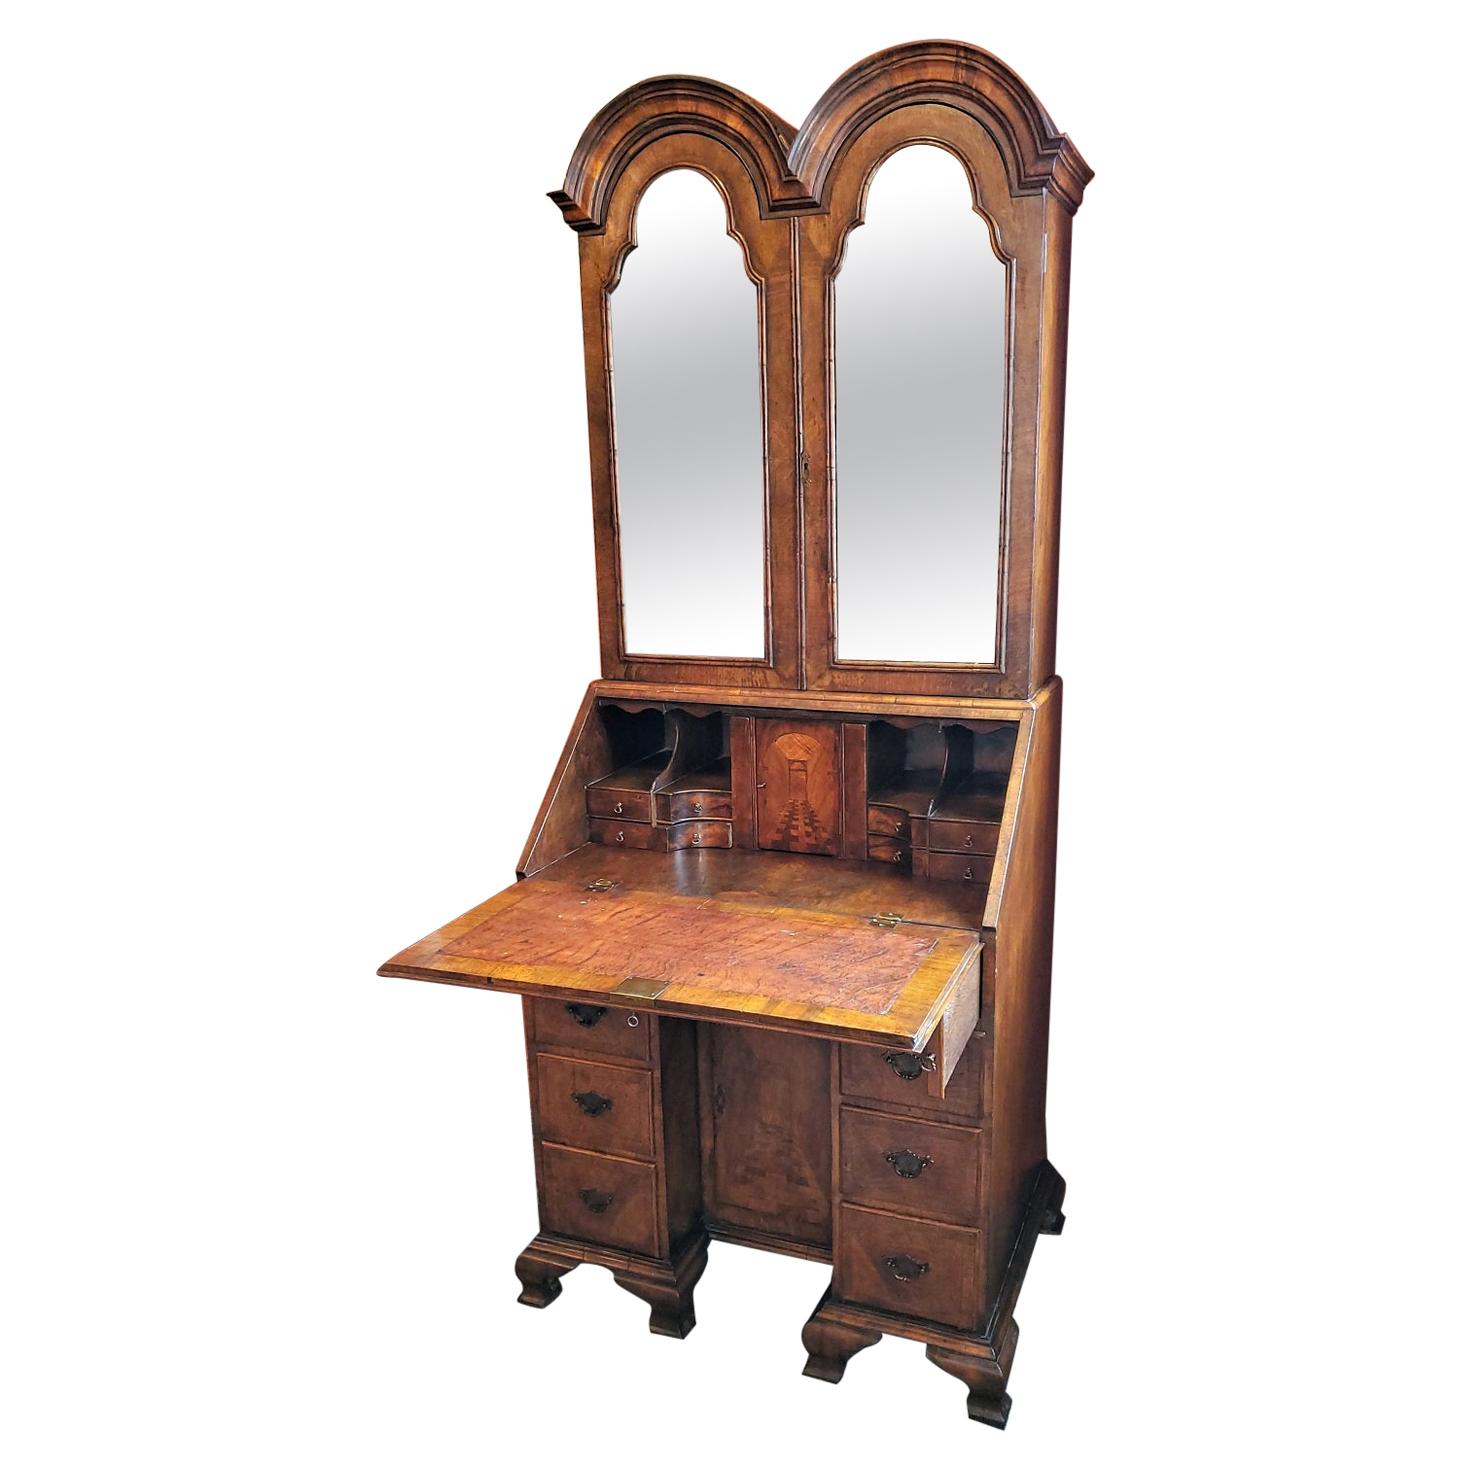 Outstanding Early 18th Century English George I Secretary For Sale